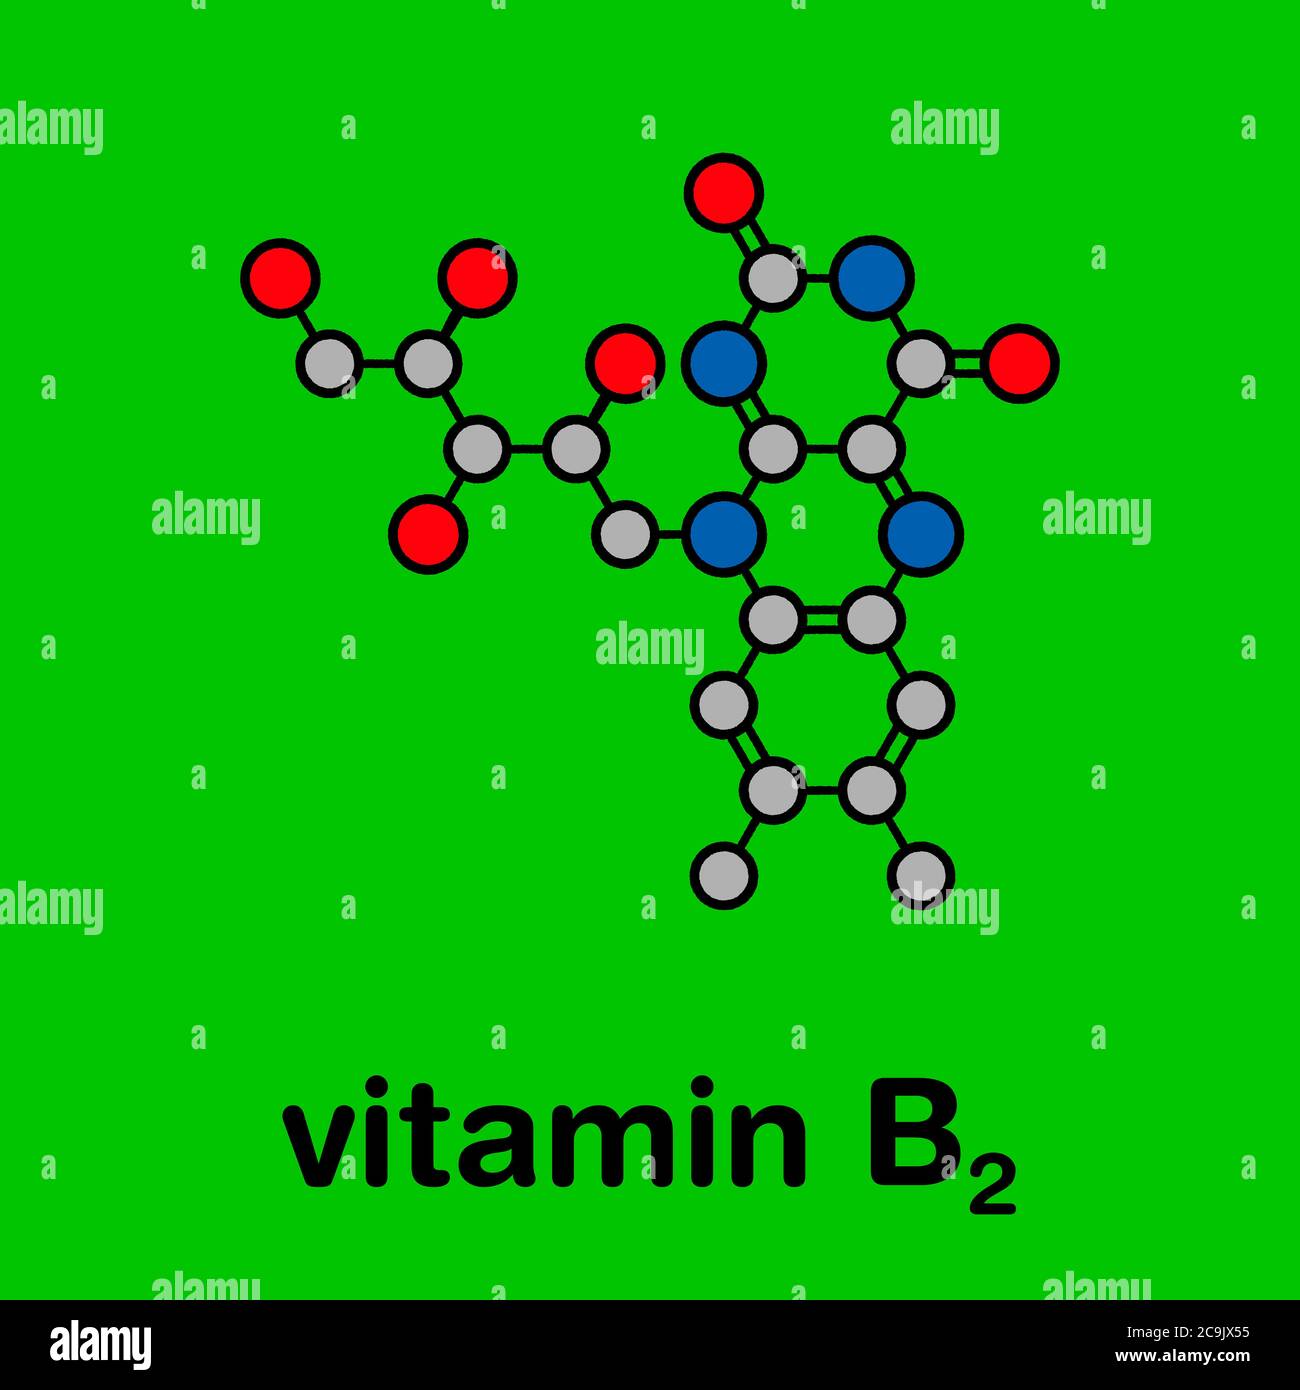 Vitamin B2 (riboflavin) molecule. Stylized skeletal formula (chemical structure). Atoms are shown as color-coded circles with thick black outlines and Stock Photo